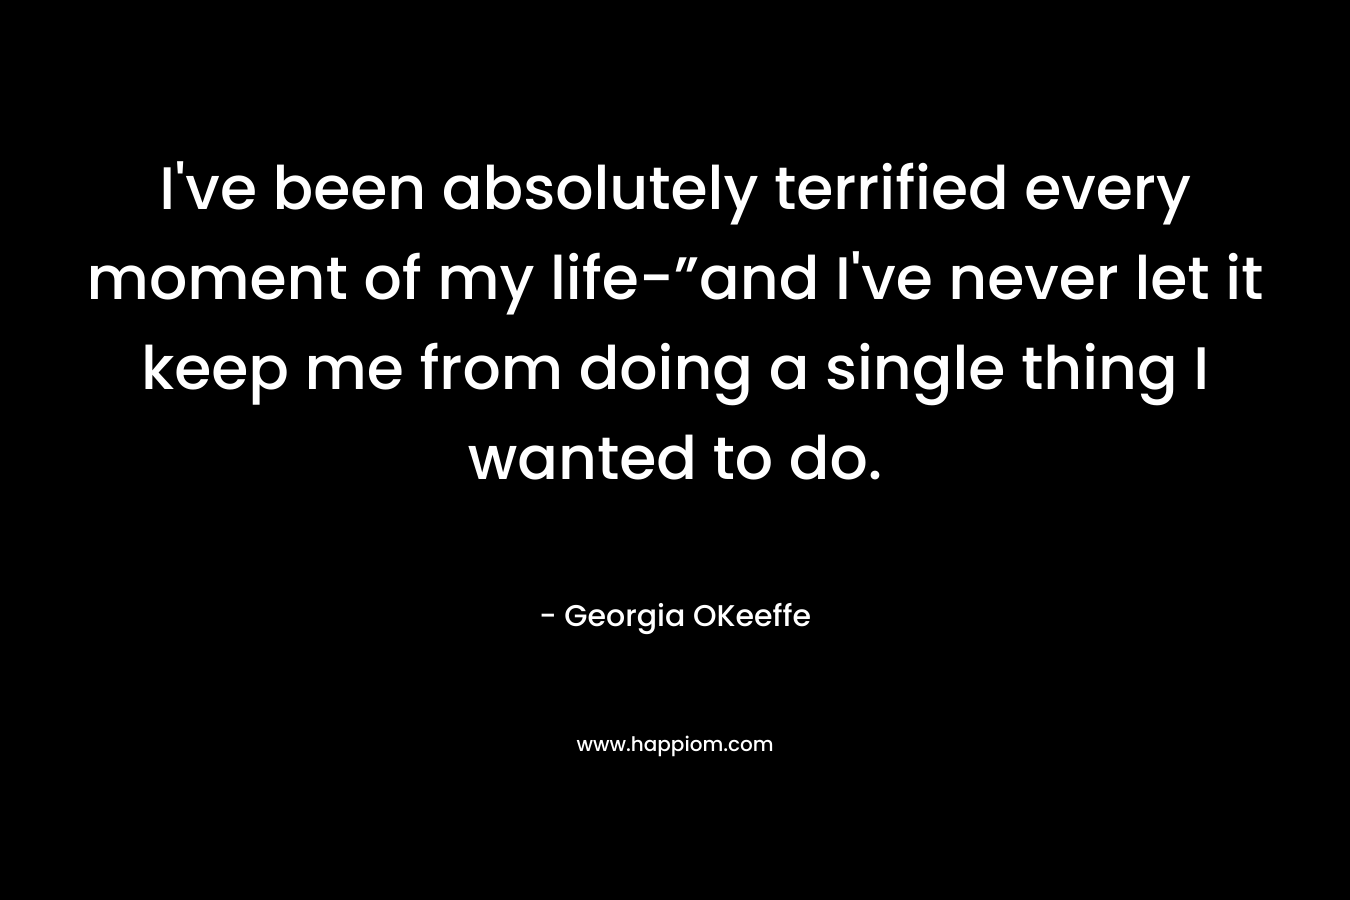 I’ve been absolutely terrified every moment of my life-”and I’ve never let it keep me from doing a single thing I wanted to do. – Georgia OKeeffe